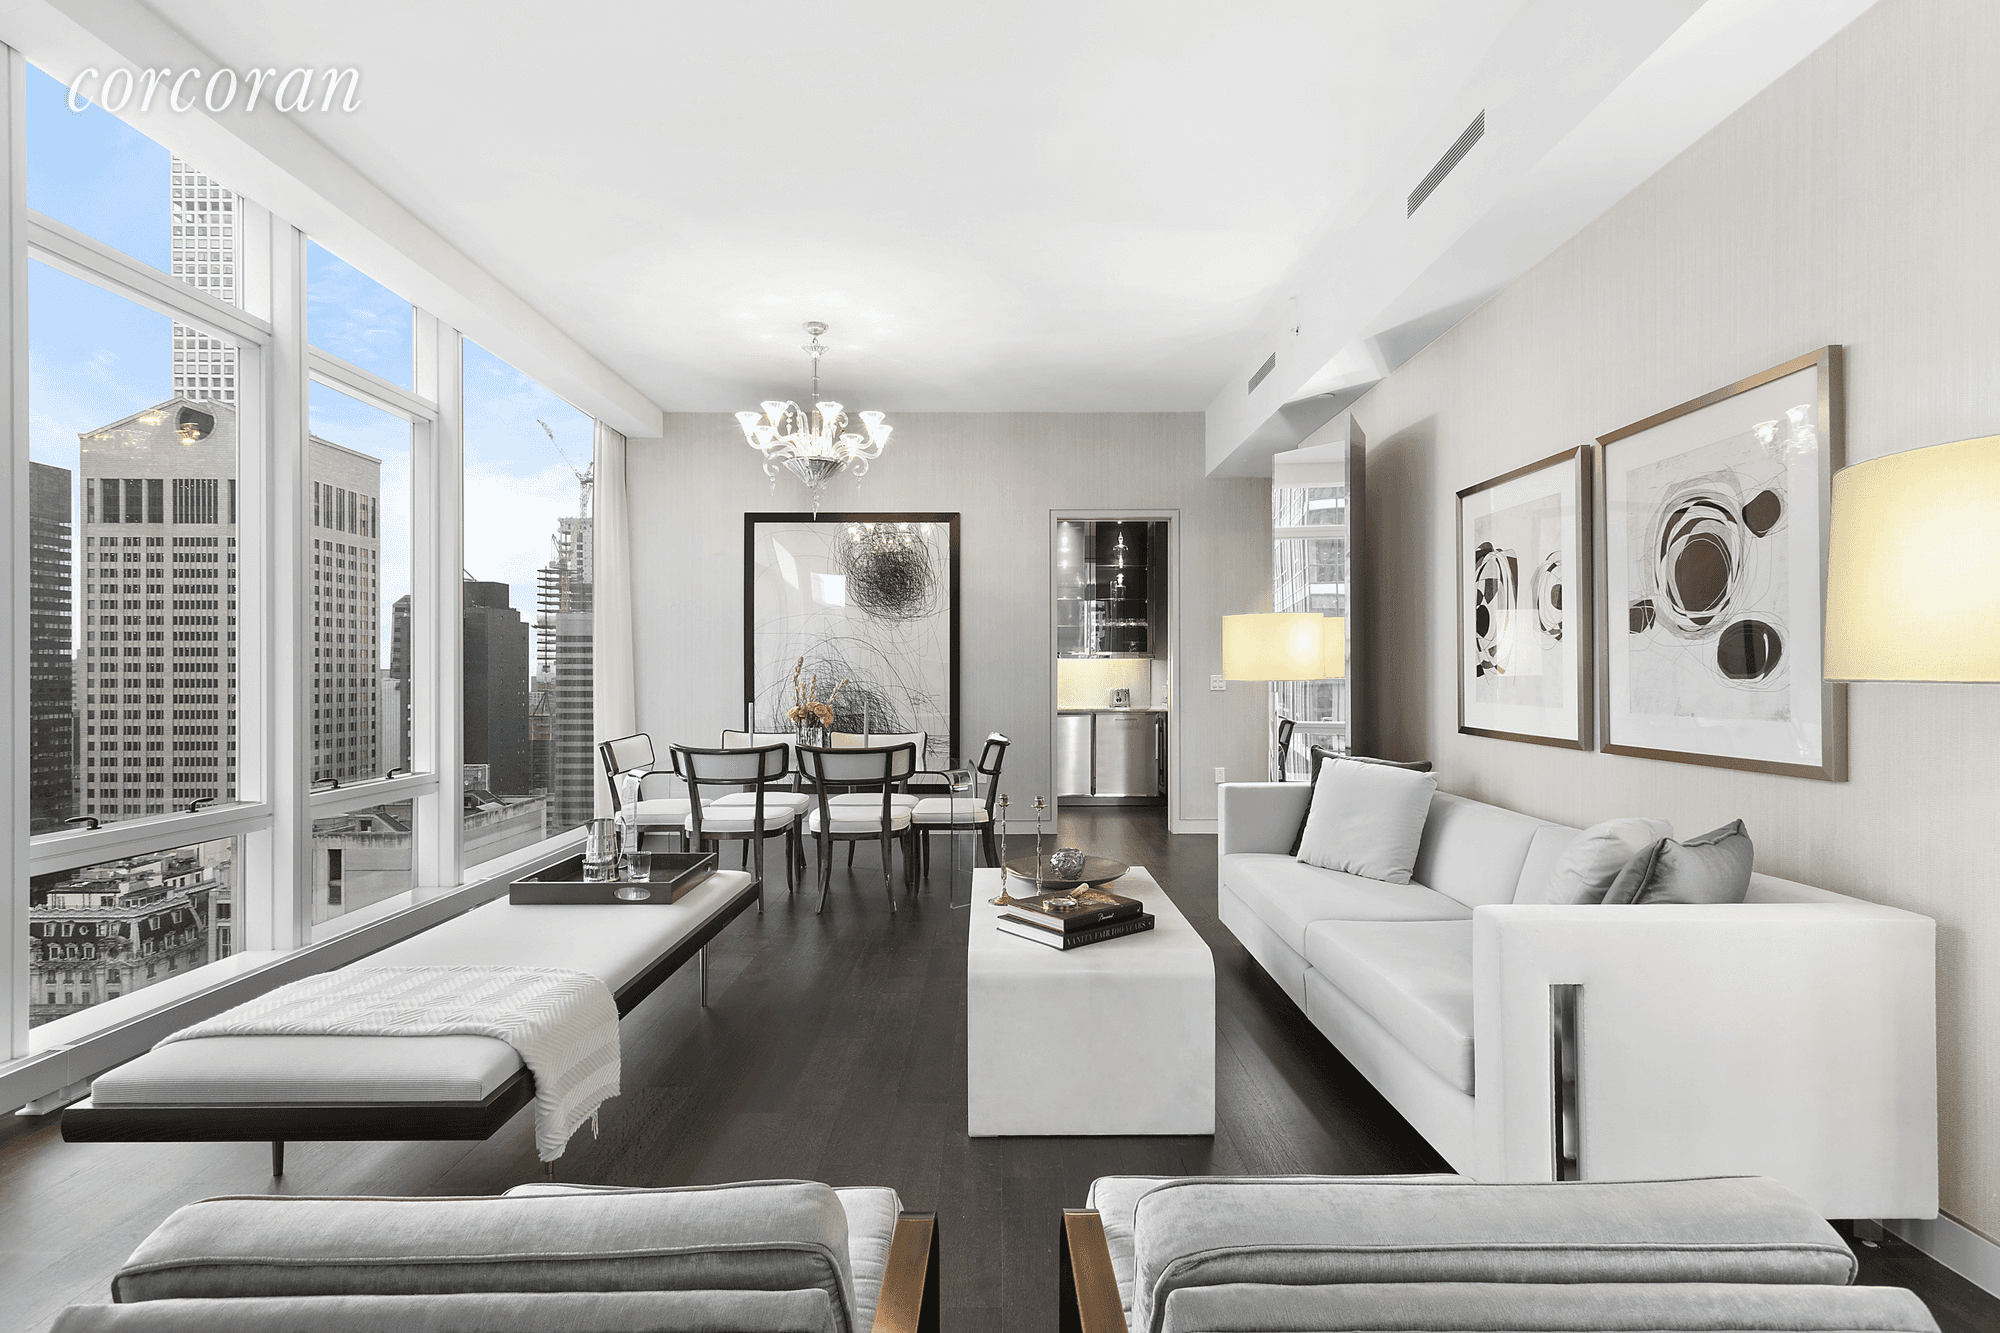 Fully Furnished Turnkey Apartment Extravagance meets serenity at the Baccarat Hotel amp ; Residences New York.